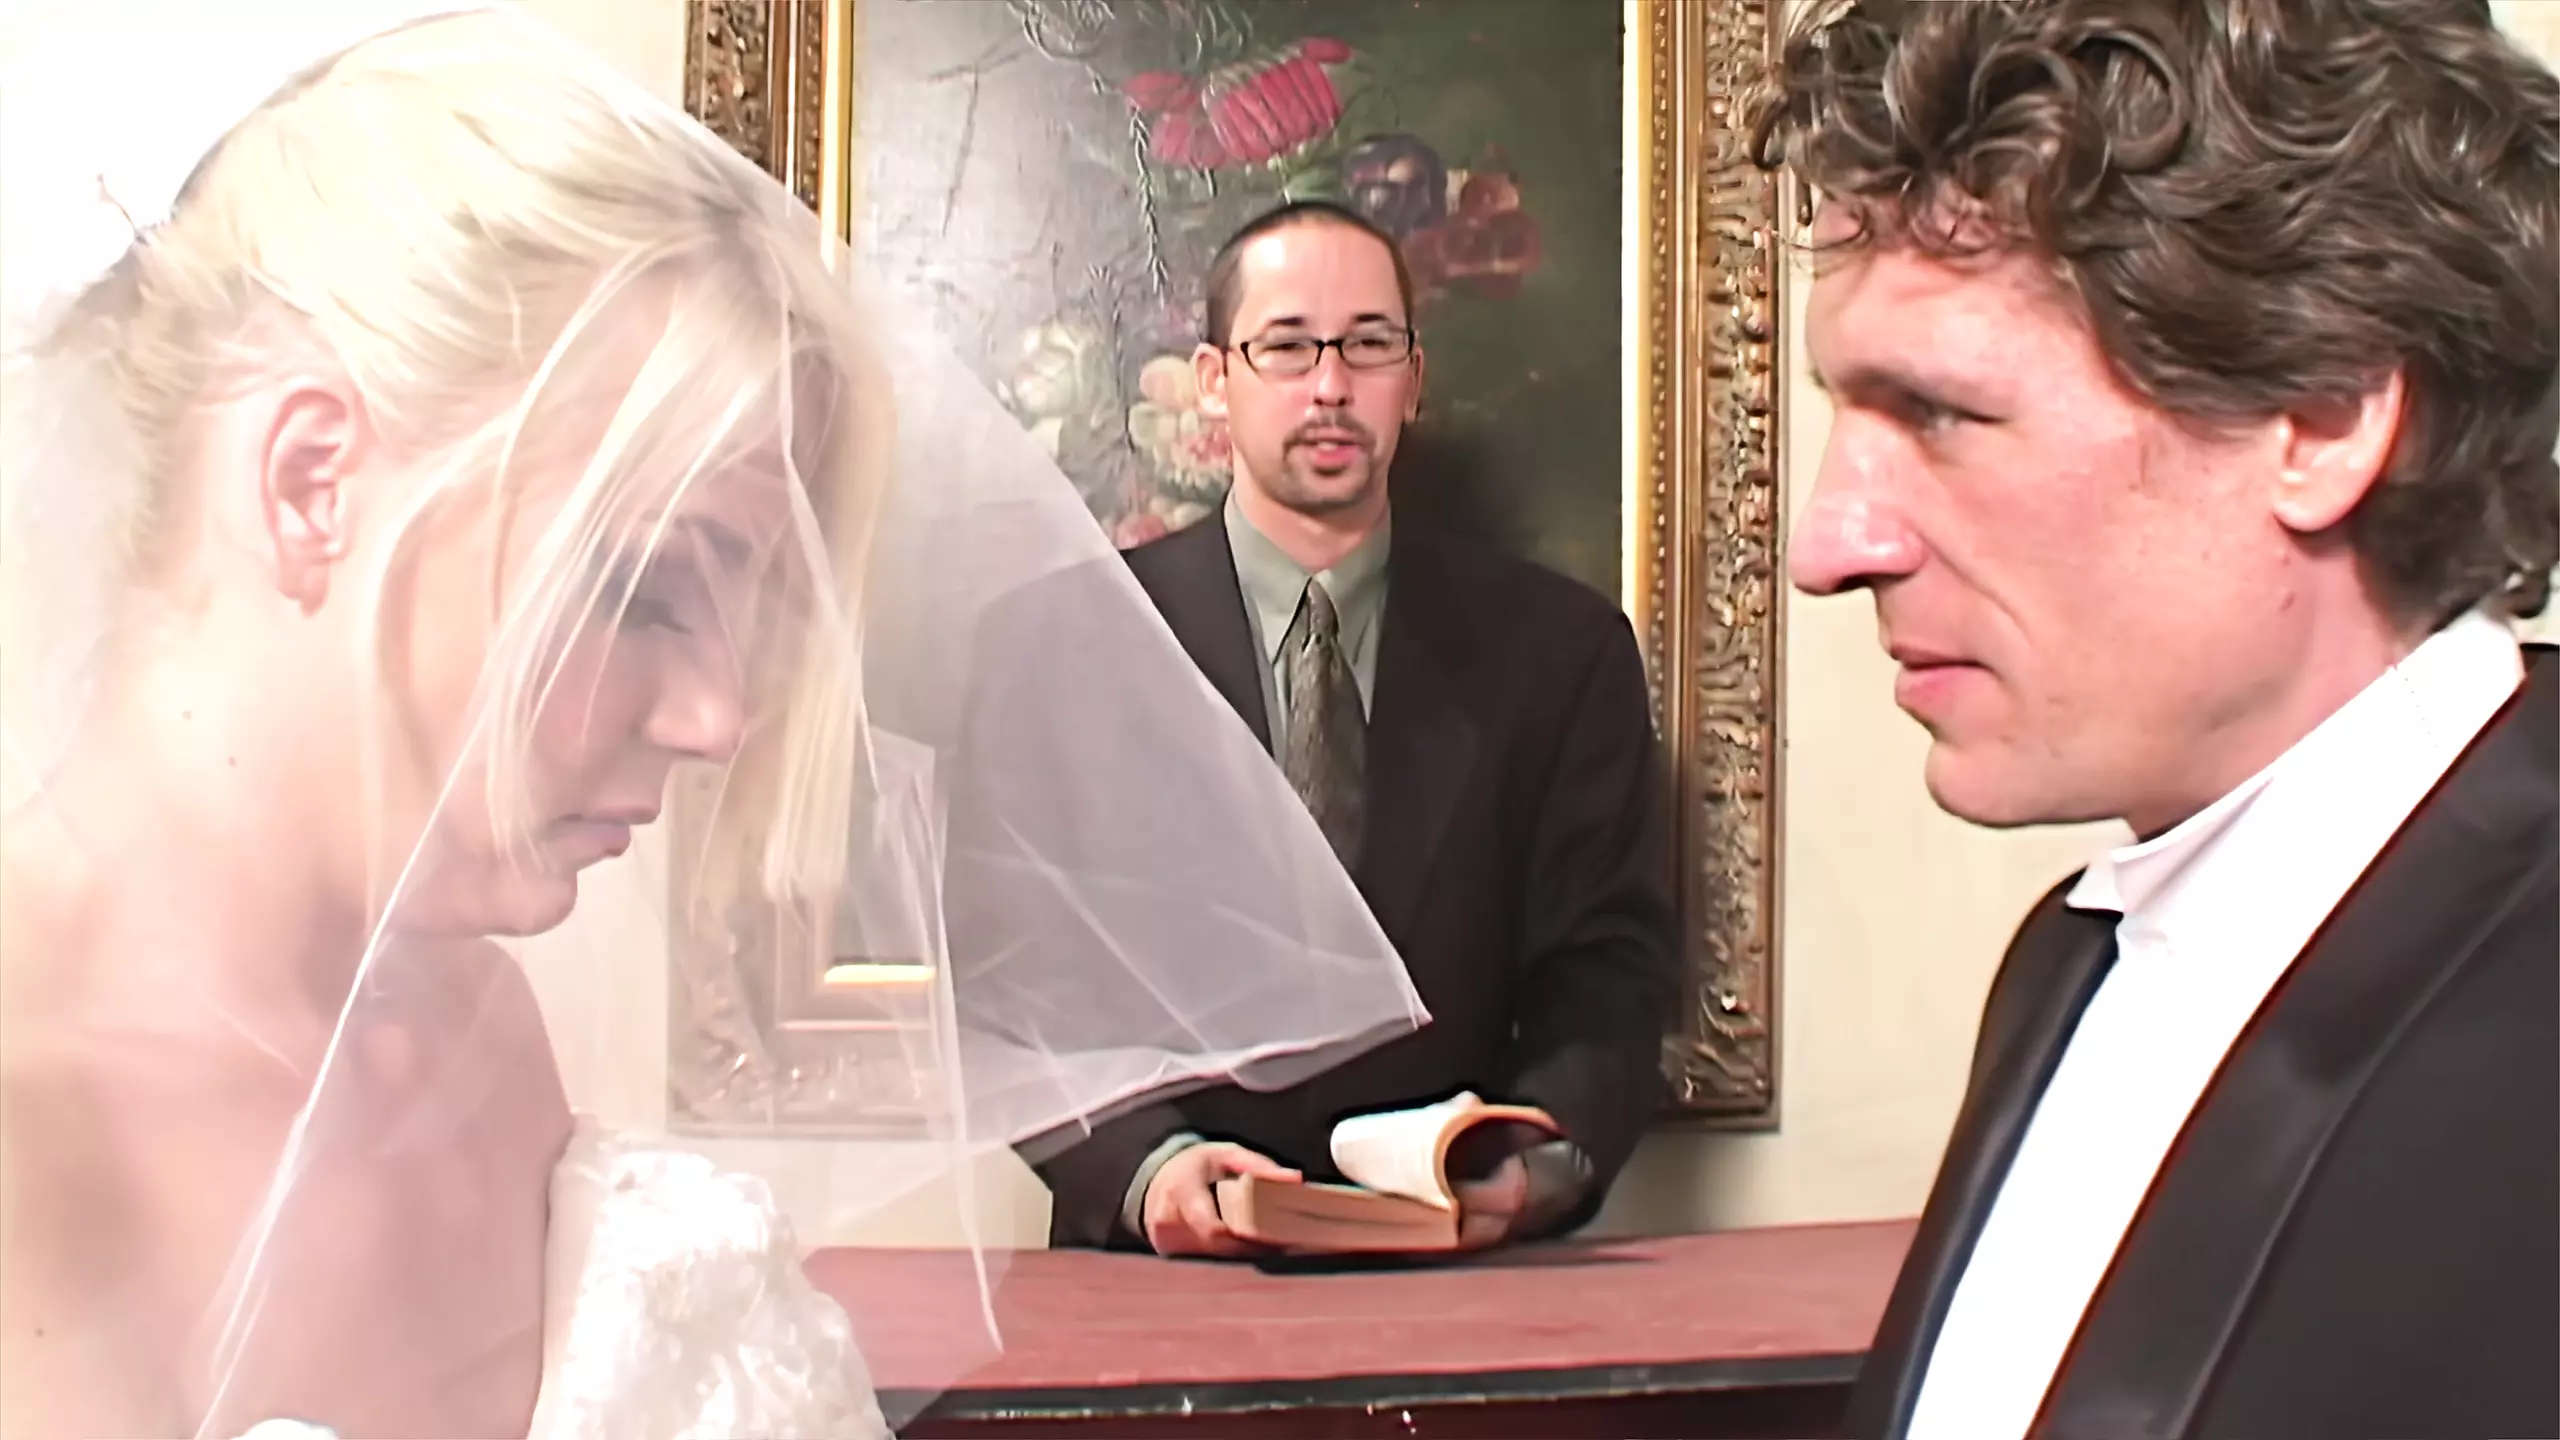 Pervert Husband Lets Newly Married Wife In Wedding Night Get Fucked By Two Latex Strangers image pic